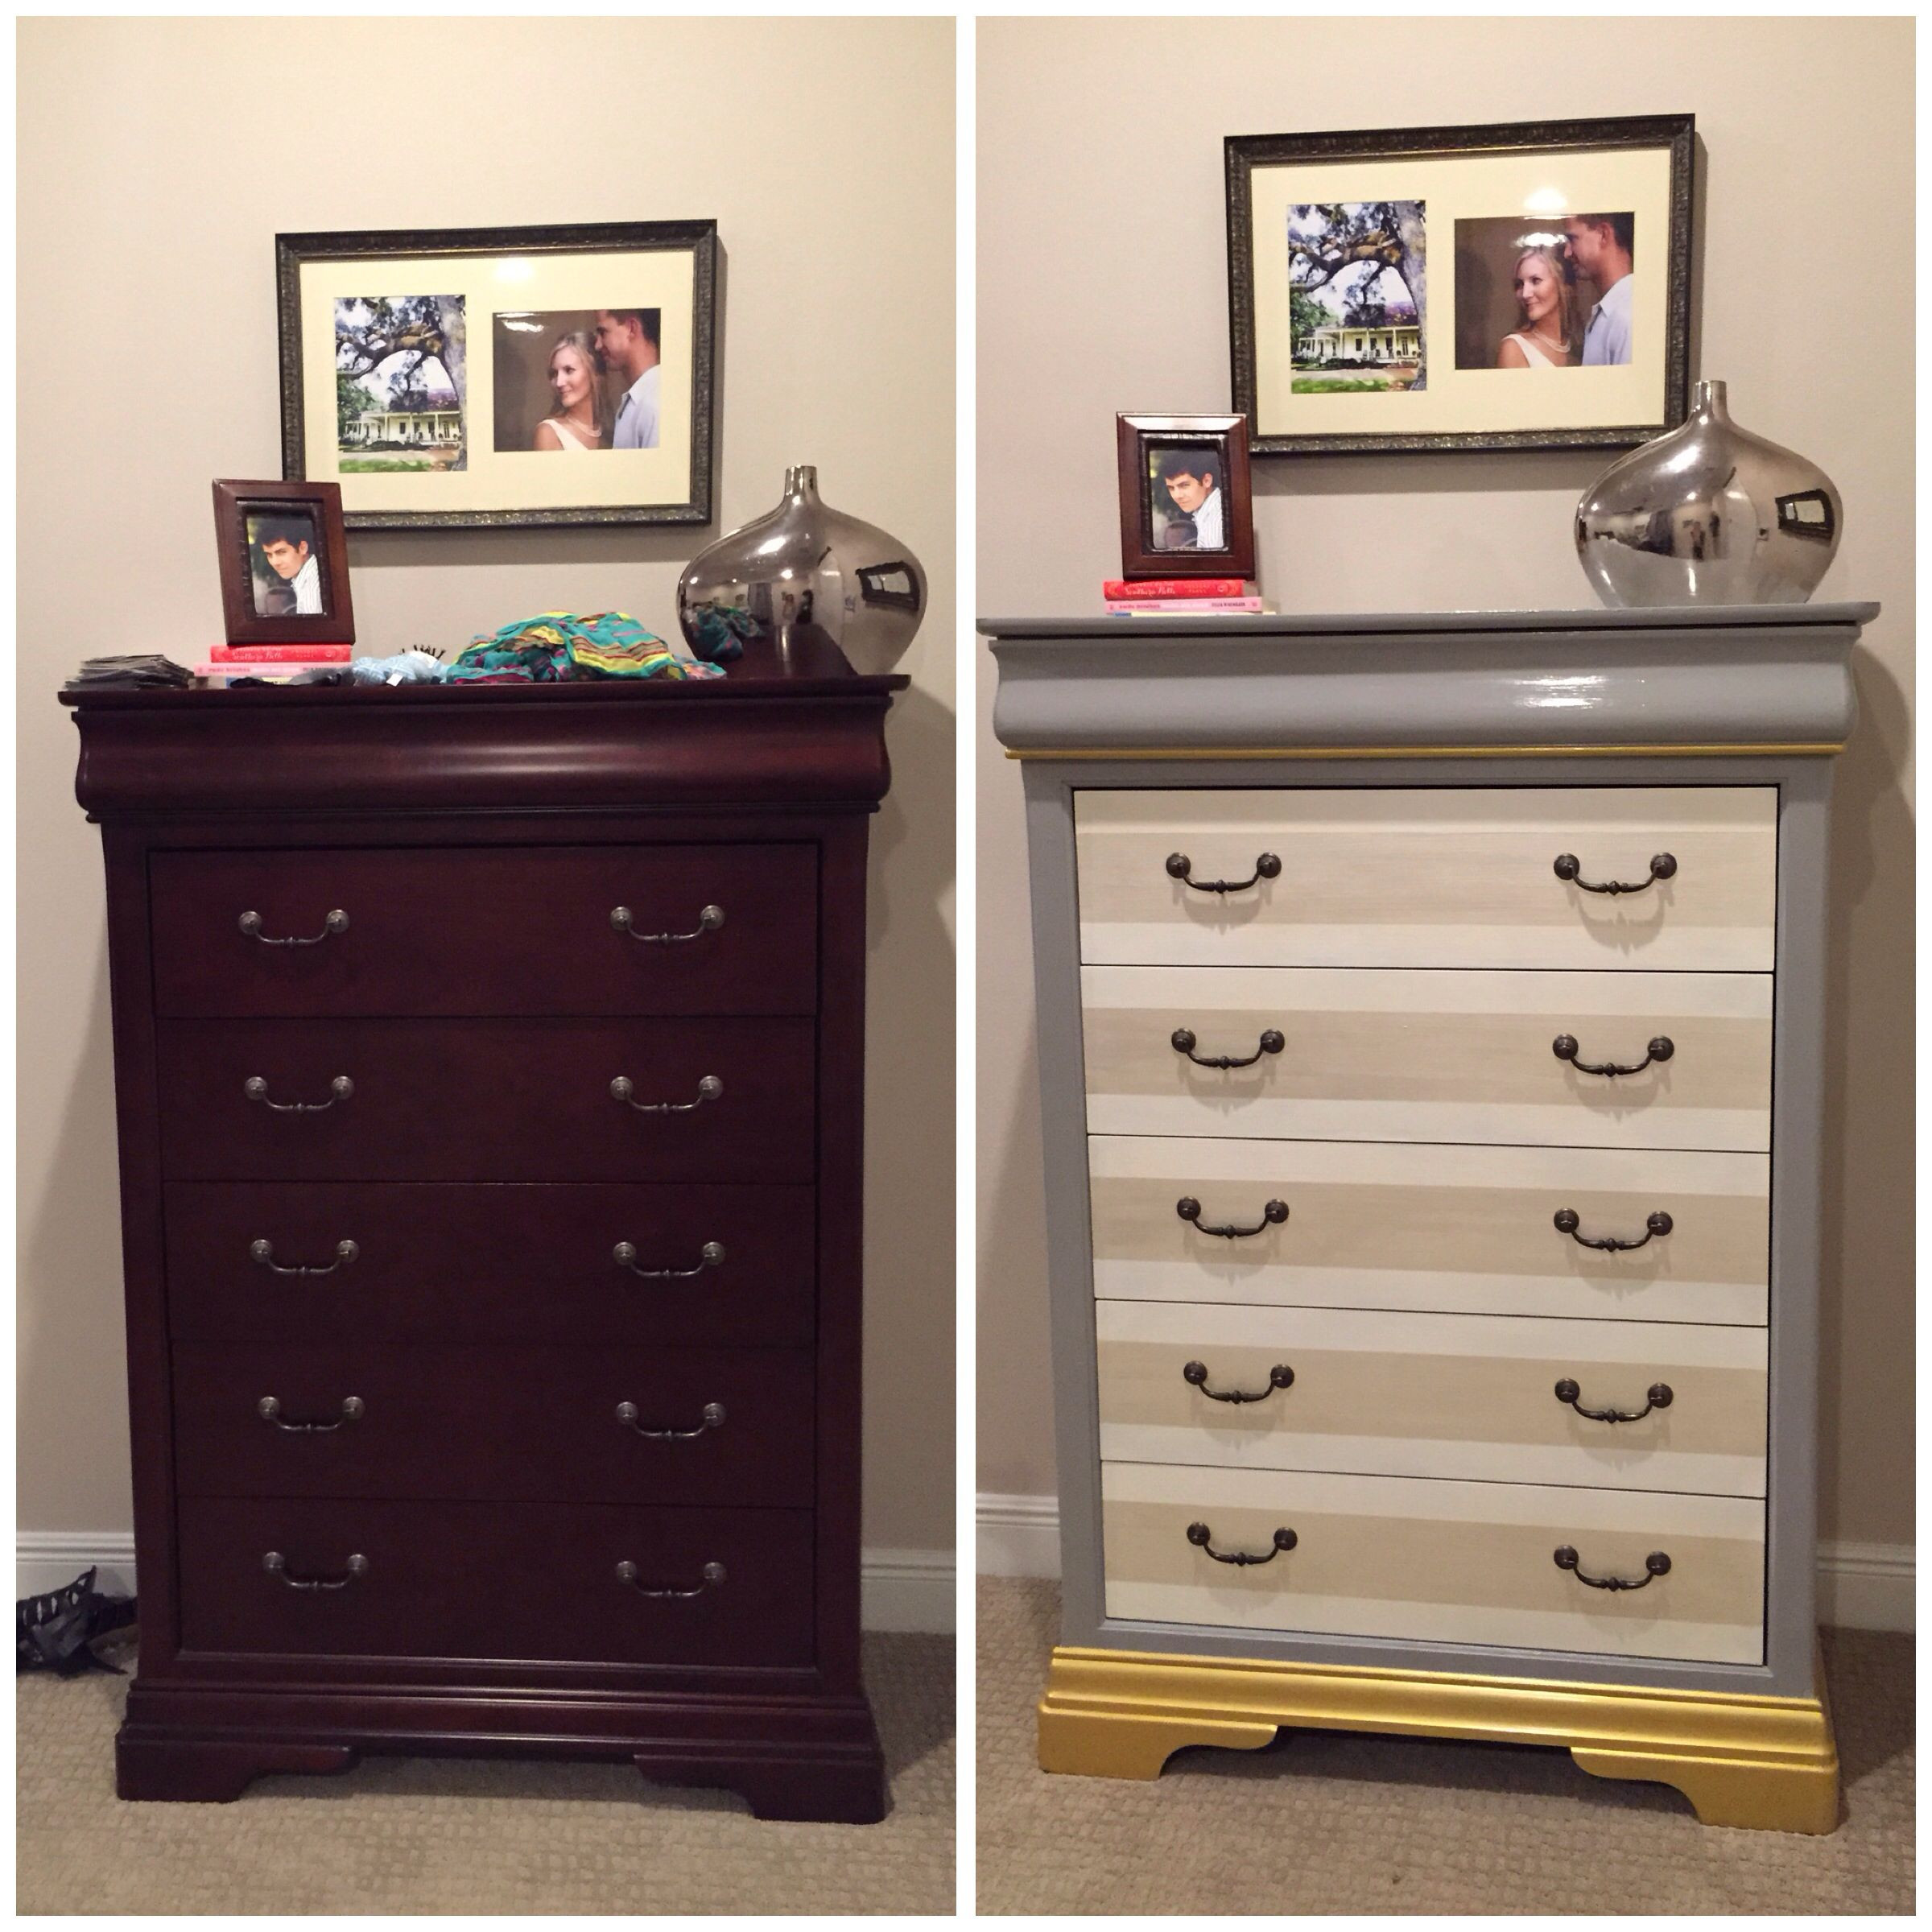 Chalk Paint Bedroom Set
 Bedroom furniture redo chest of drawers before & after